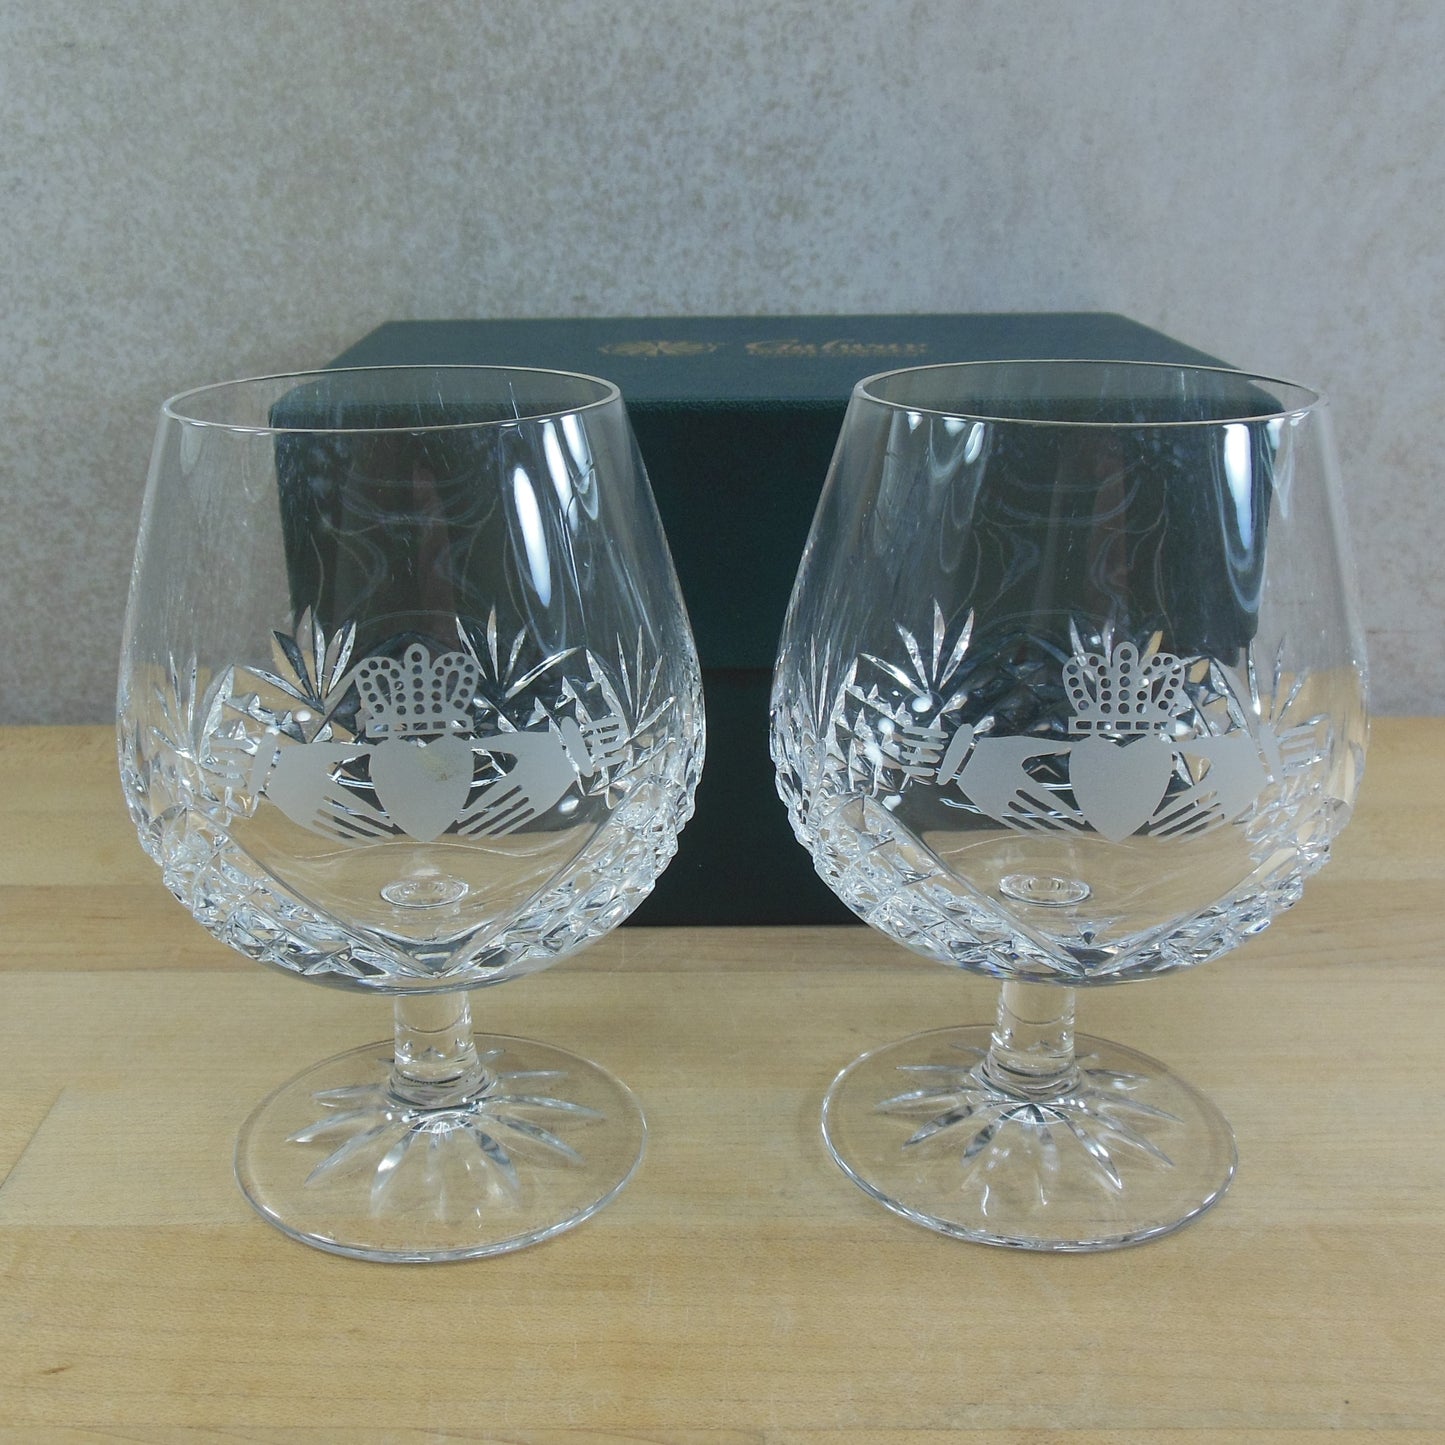 Galway Irish Crystal Claddagh Brandy Snifters Boxed Heart Hands Crown